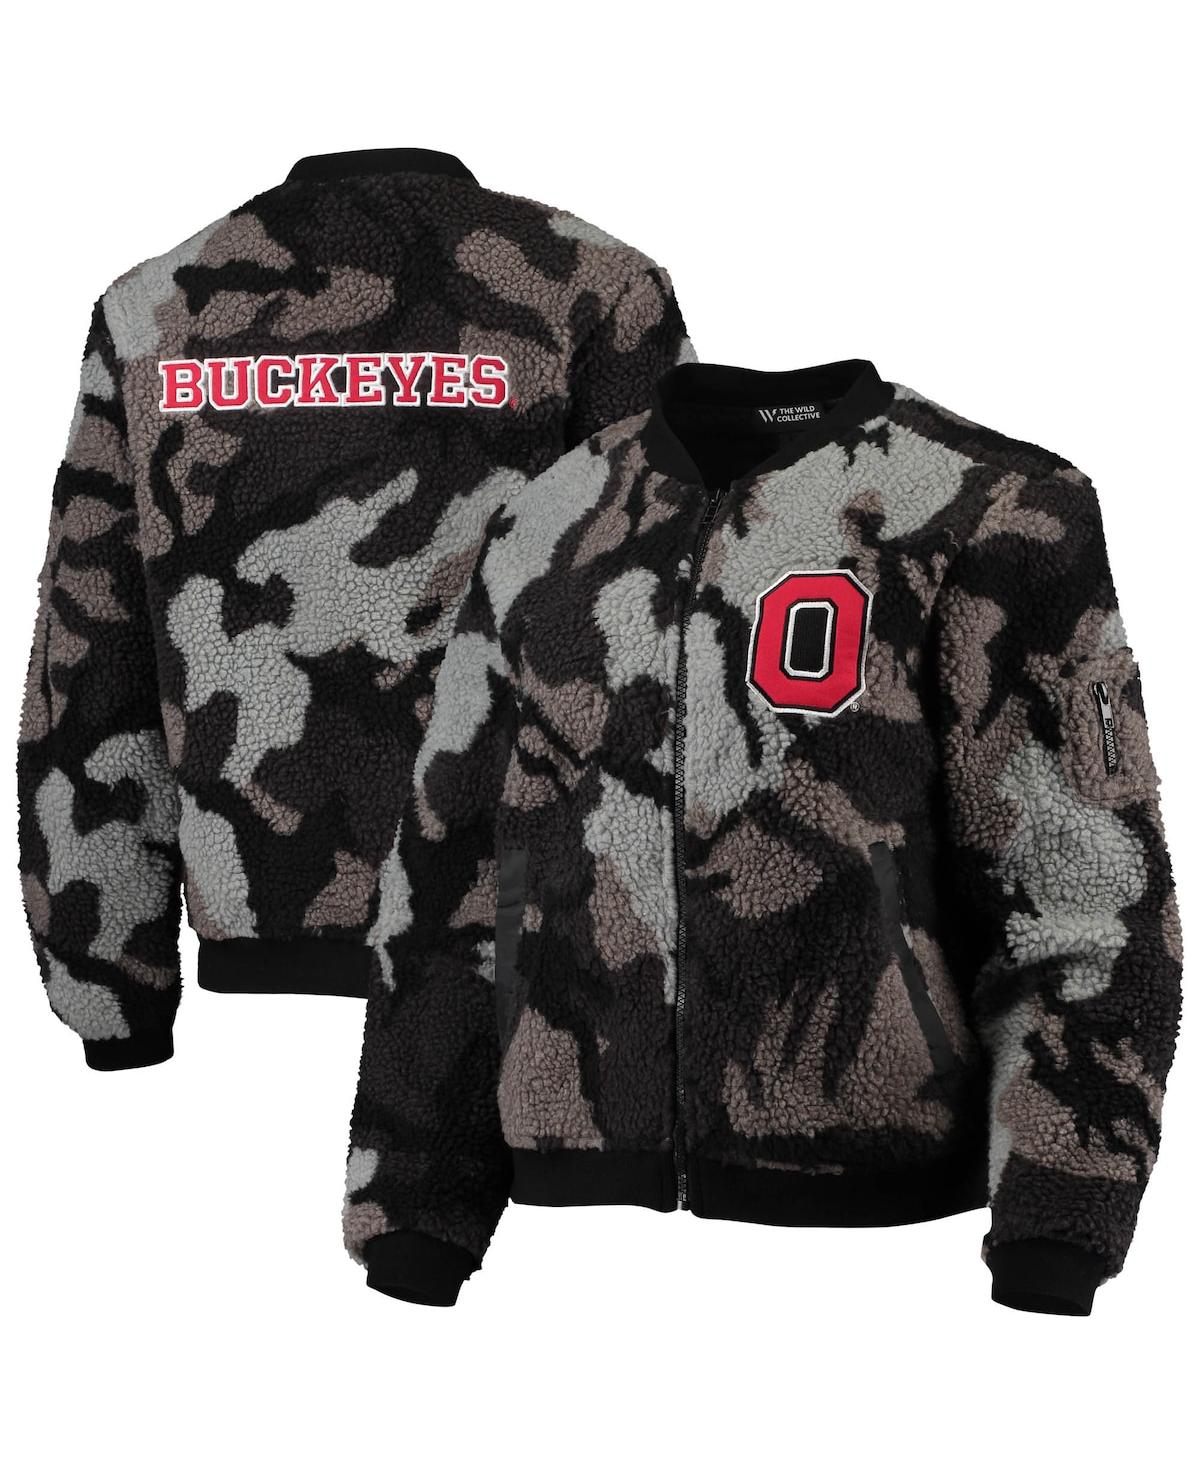 THE WILD COLLECTIVE WOMEN'S THE WILD COLLECTIVE BLACK OHIO STATE BUCKEYES SHERPA BOMBER FULL-ZIP JACKET